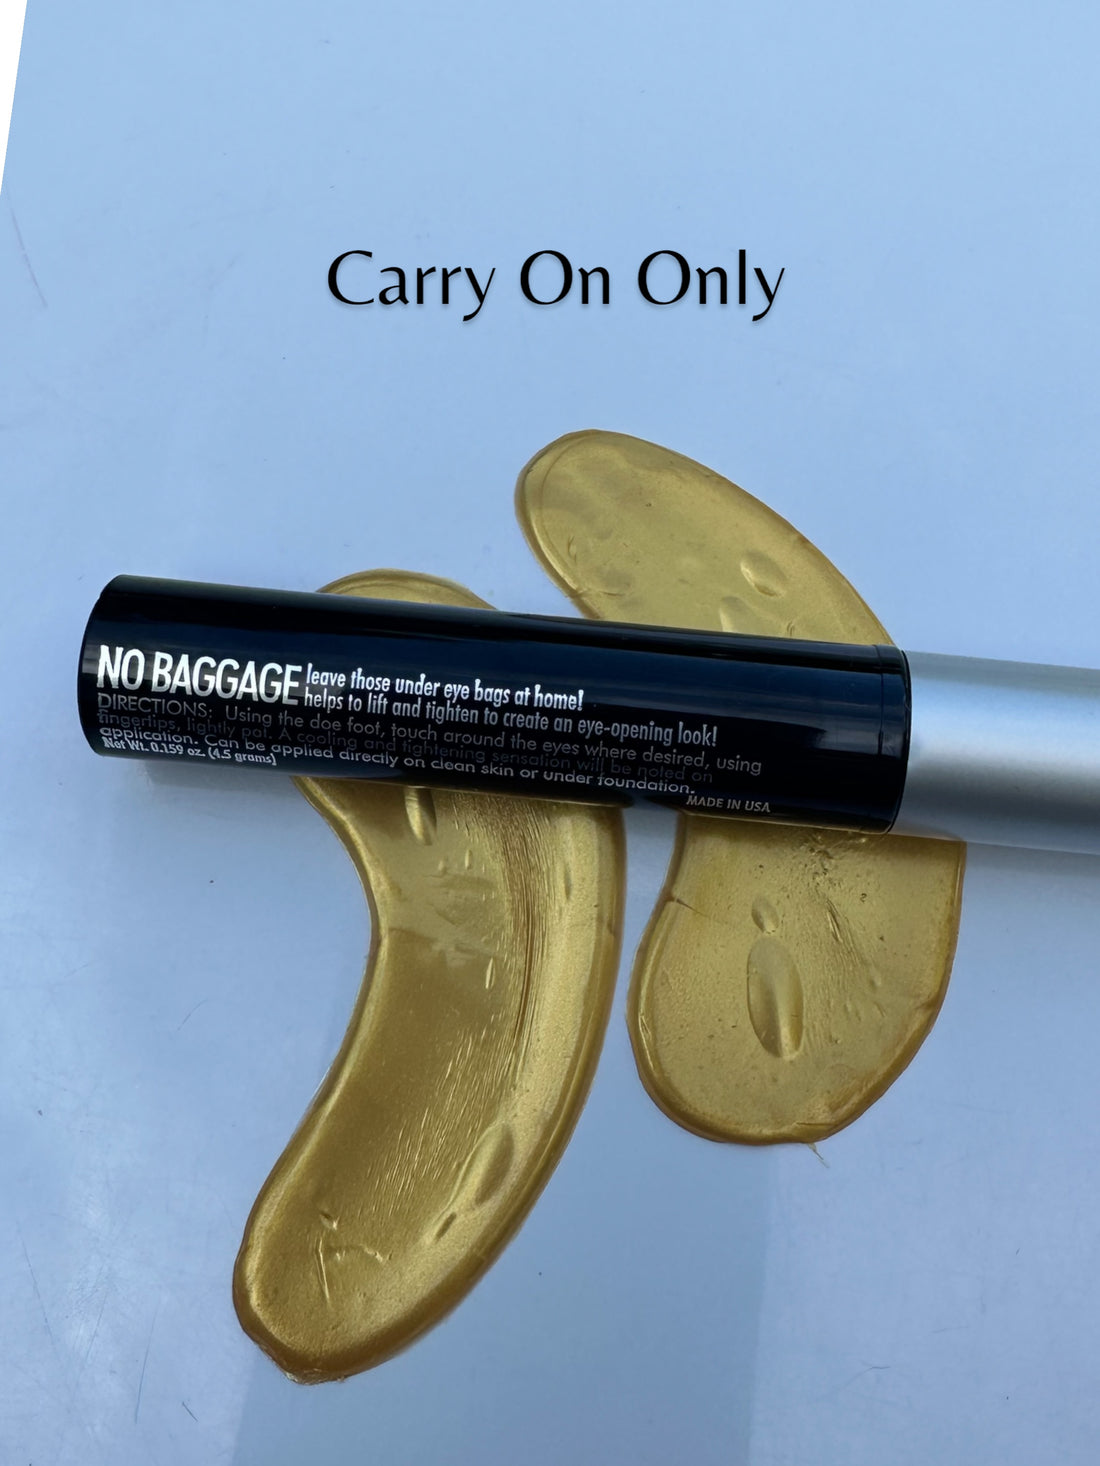 Cat’s Under Eye Miracle Duo!  Carry on Only, leave those heavy bags behind!